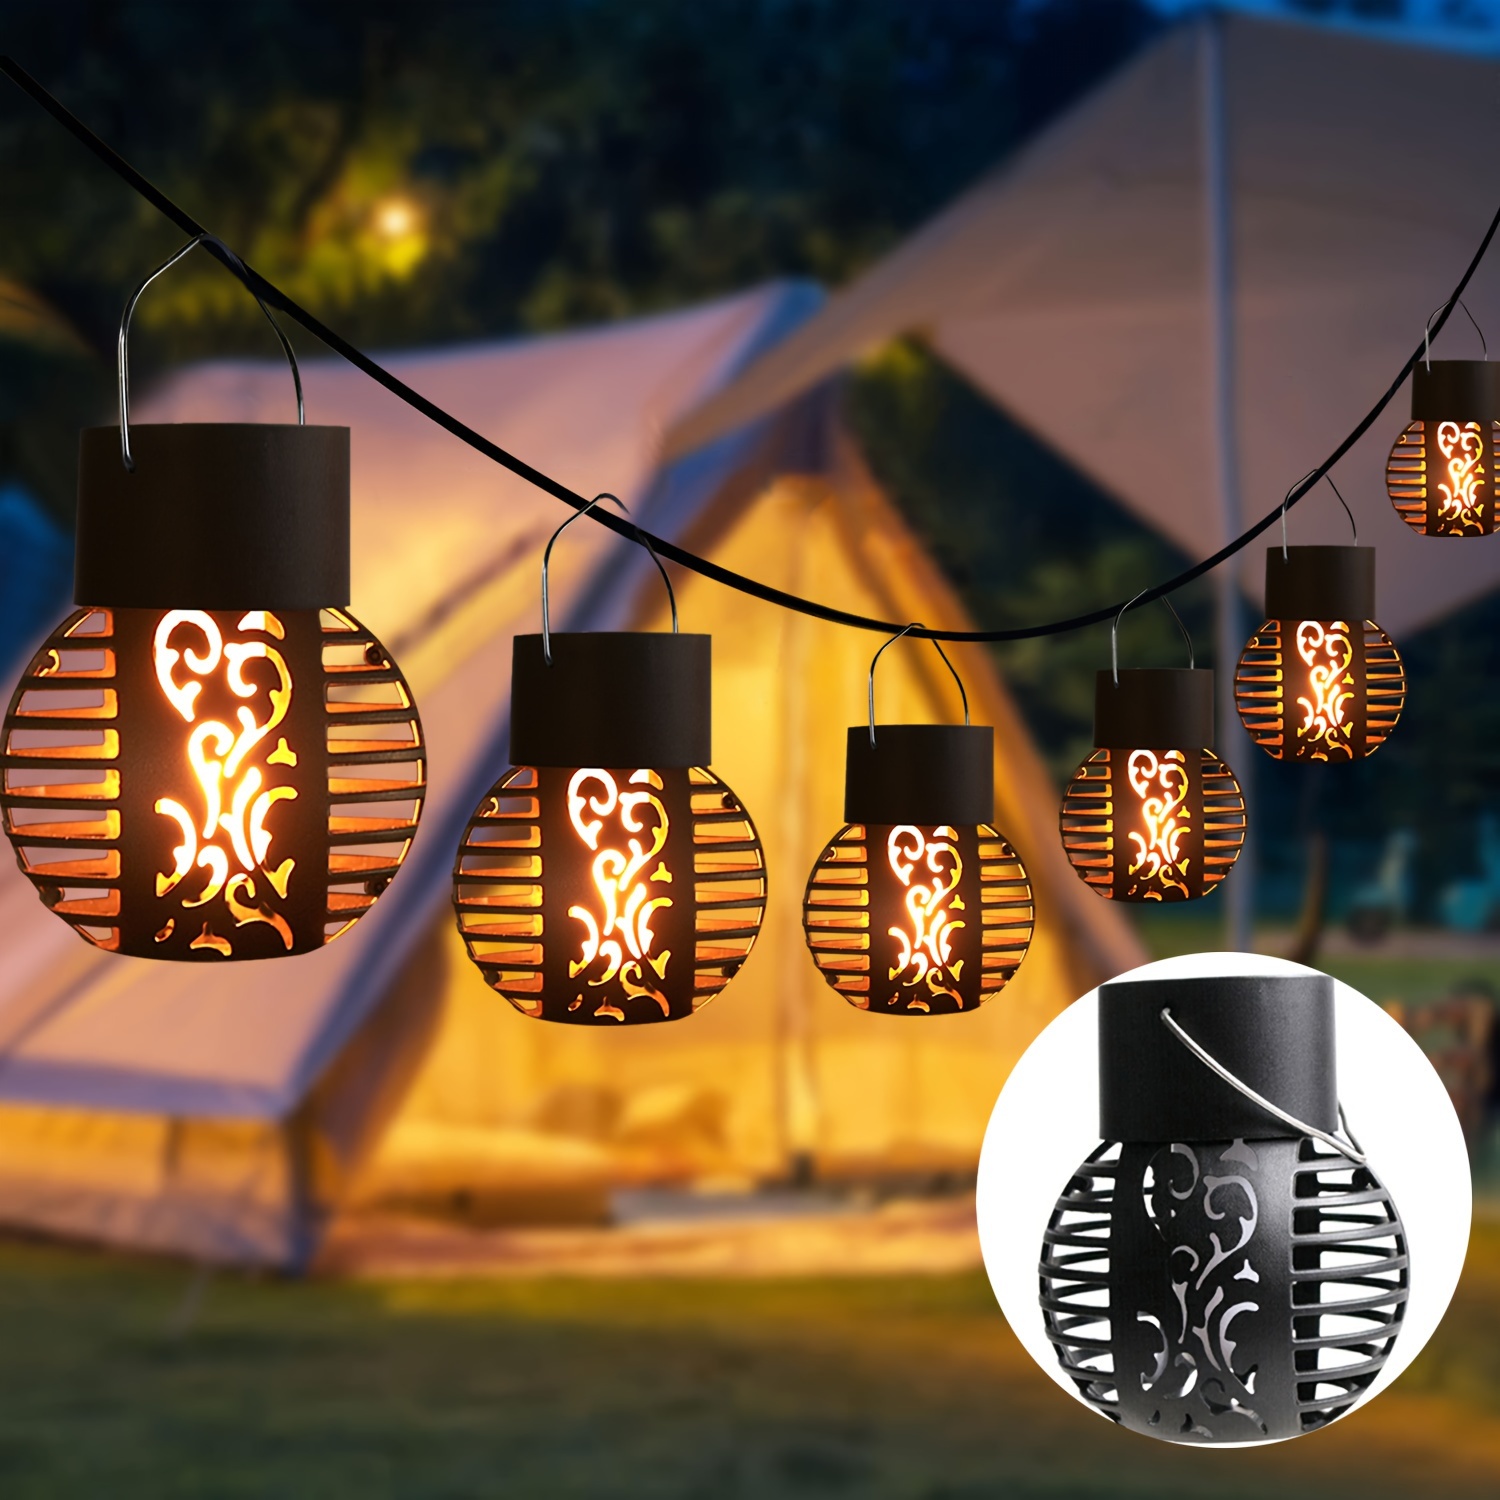 

4pcs Solar-powered Hanging Led Lanterns, Outdoor Flickering Flame Globe Lights, Plastic Decorative Lighting For Garden, Patio, Fence, Lawn, Pathway, Camping, Tree Branches, And Seasonal Festive Decor